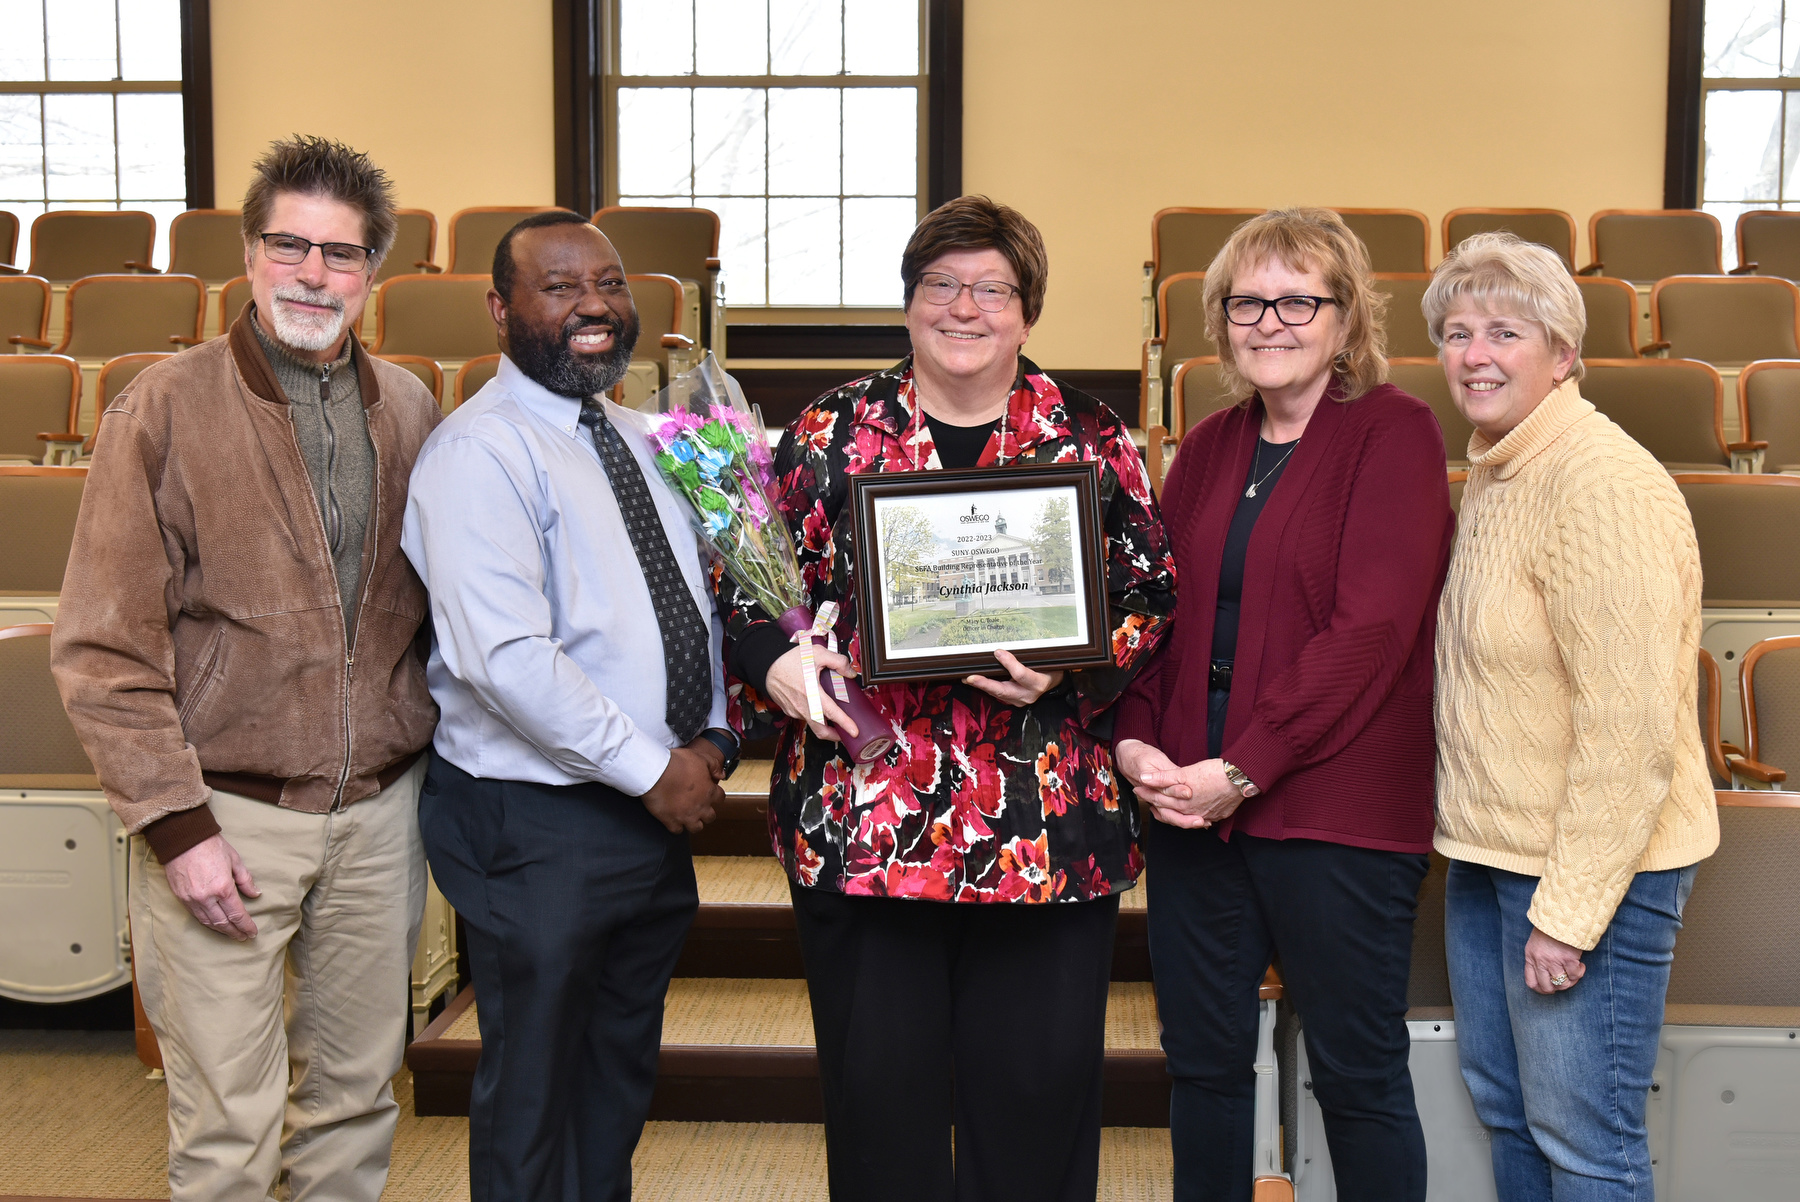 Cynthia Jackson in the Office of Admissions was named Building Rep of the Year during recent State Employees Federated Appeal (SEFA) fundraising efforts at SUNY Oswego.